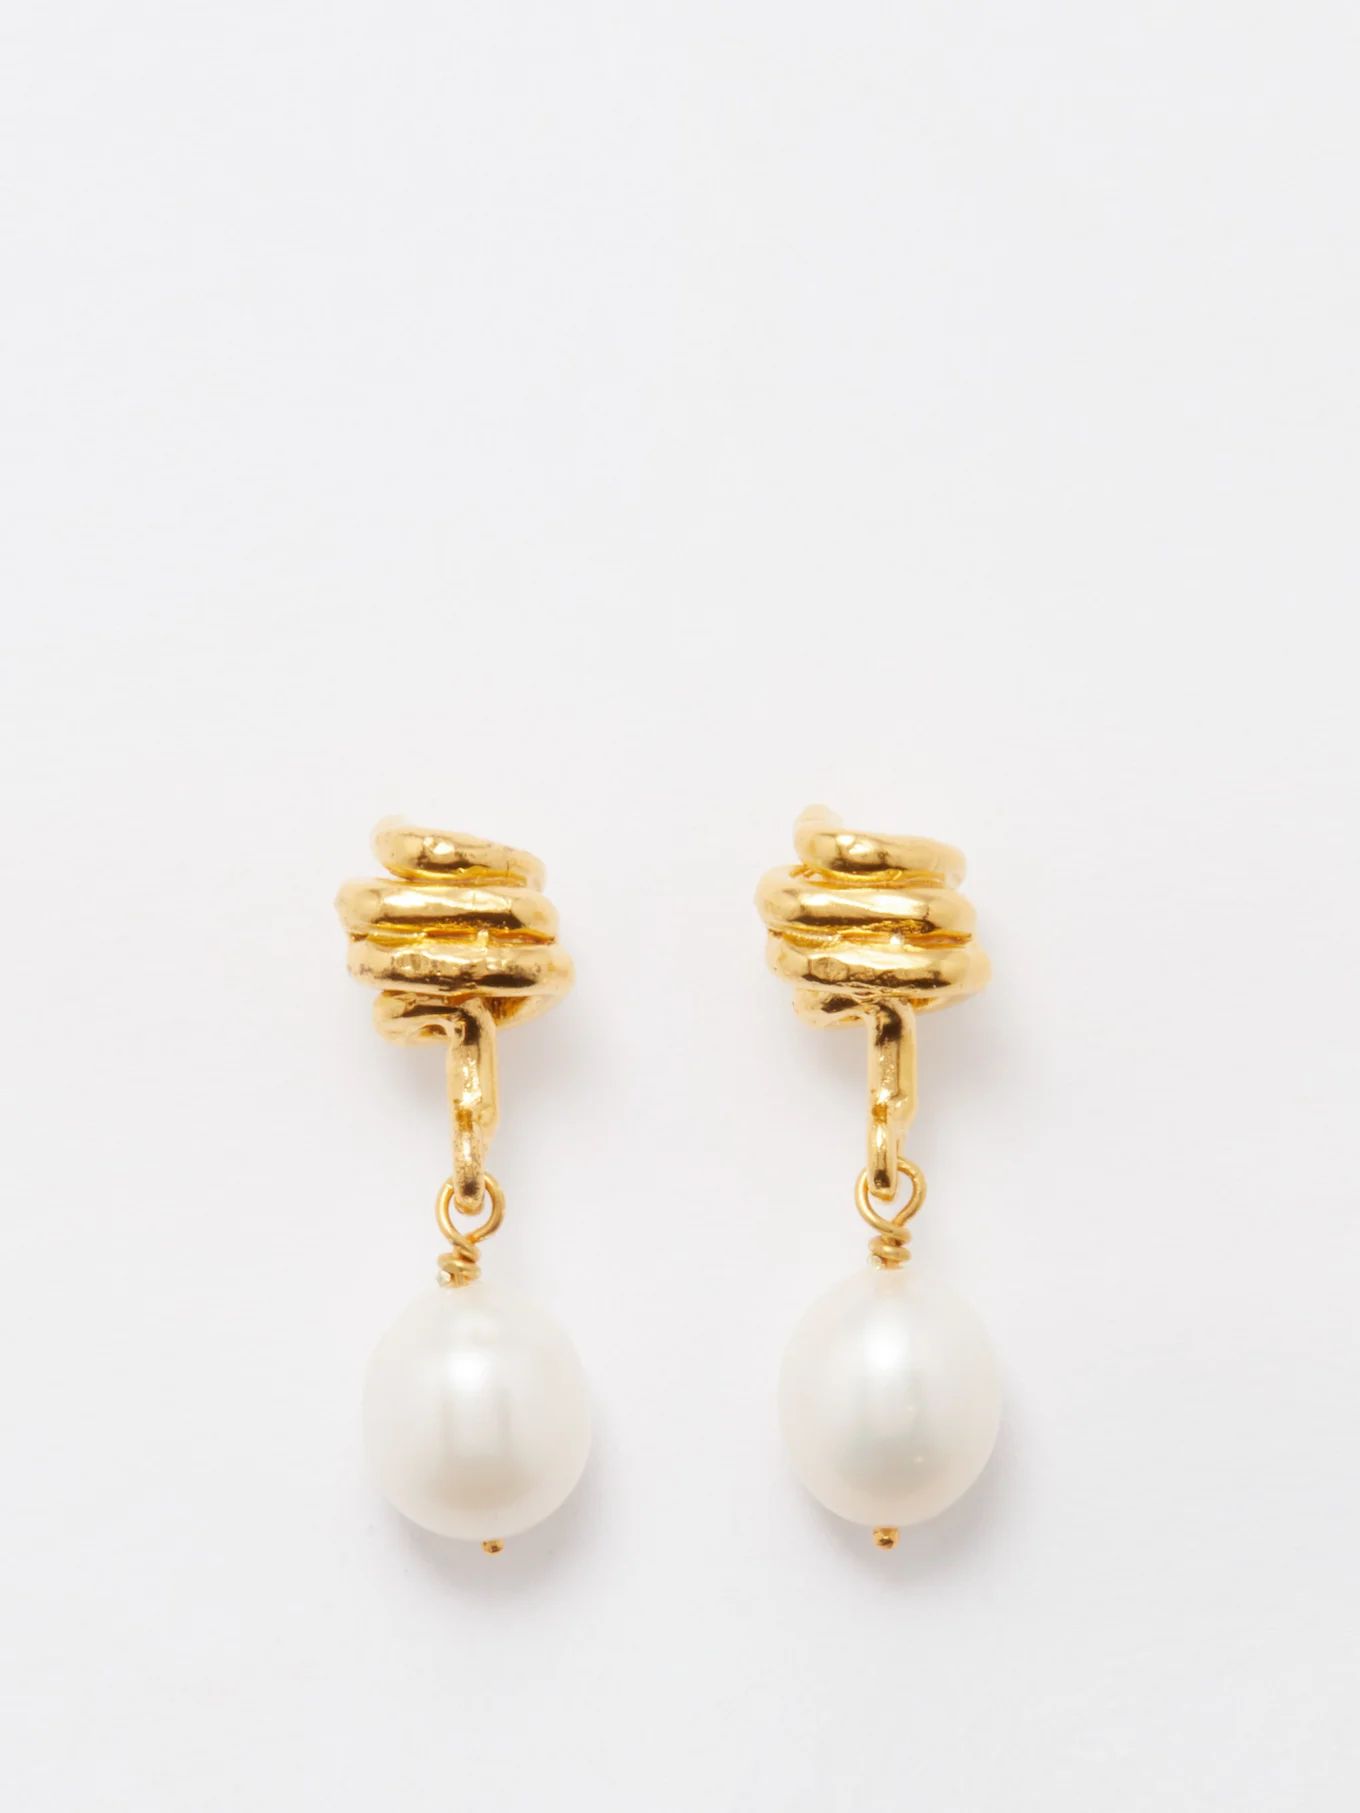 The Celestial Raindrop 24kt gold-plated earrings | Alighieri | Matches (US)